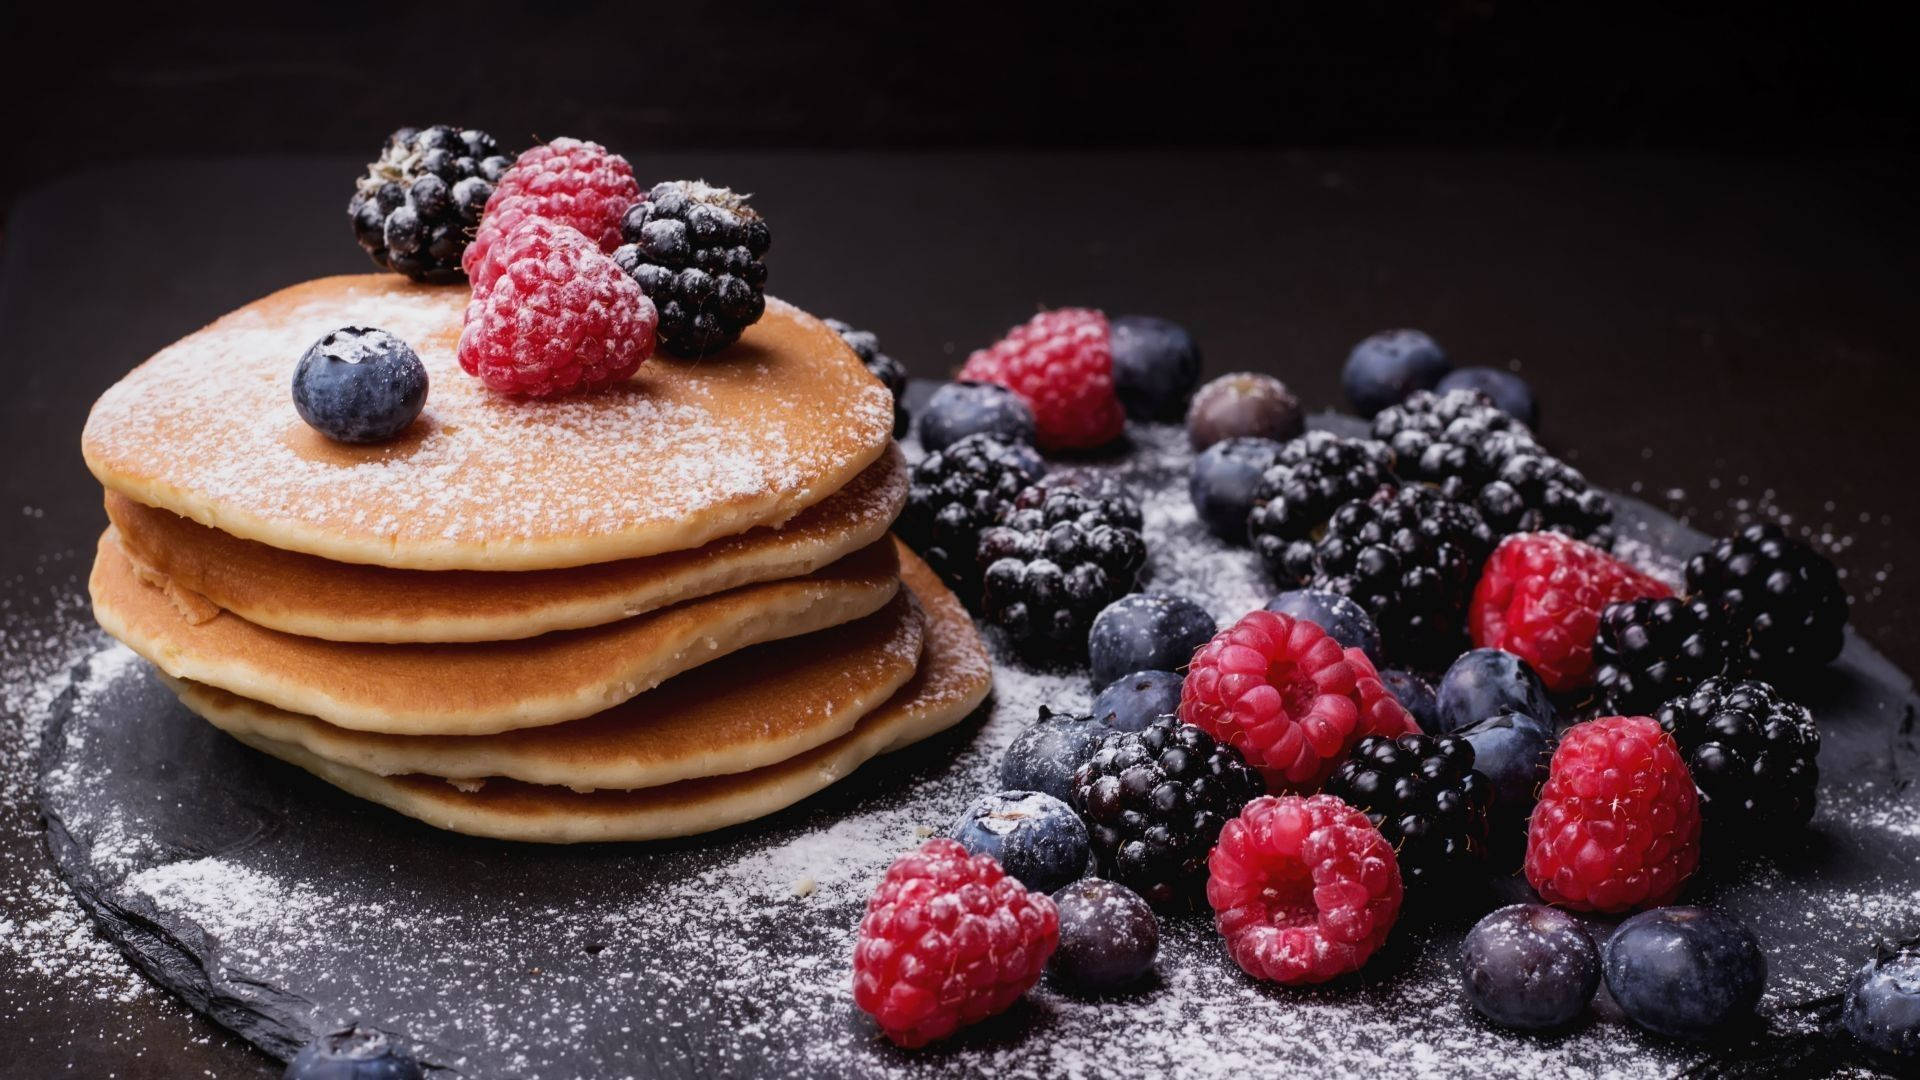 Delicious Pancakes Topped With Sugar And Berries Background